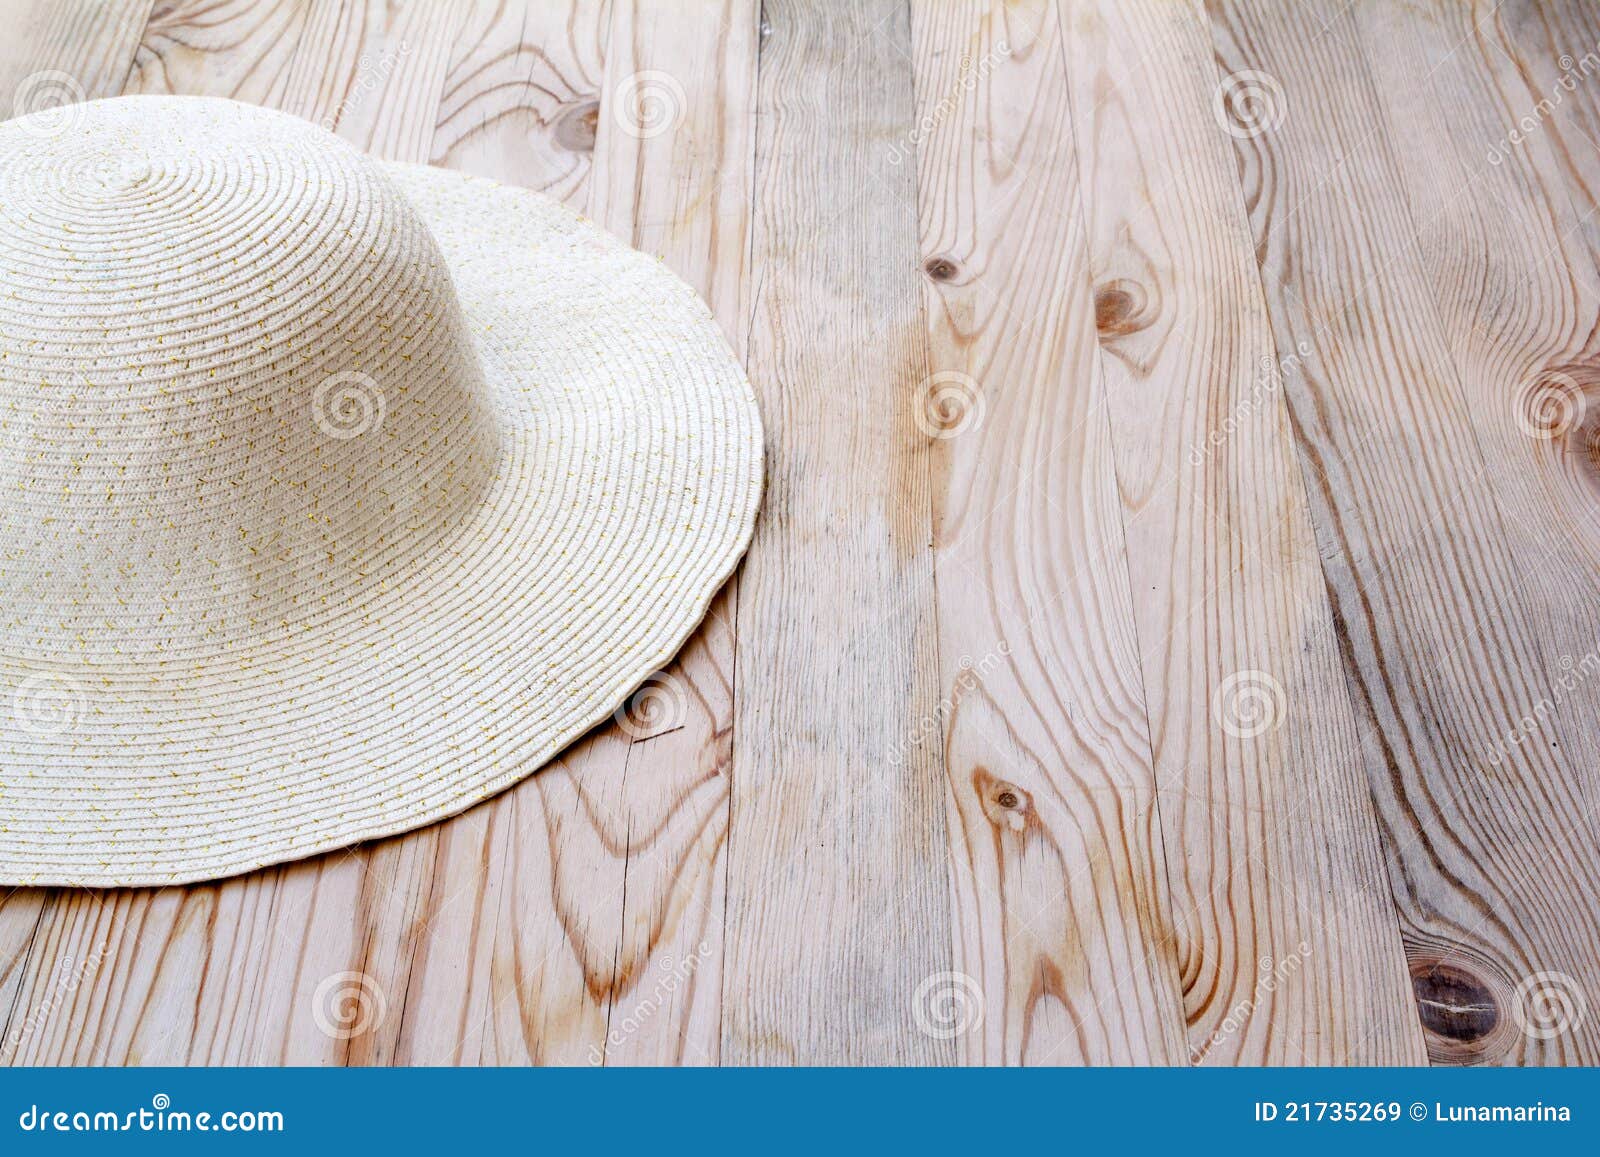 Beach White Hat on Clear Pine Wood Stock Image - Image of classic ...